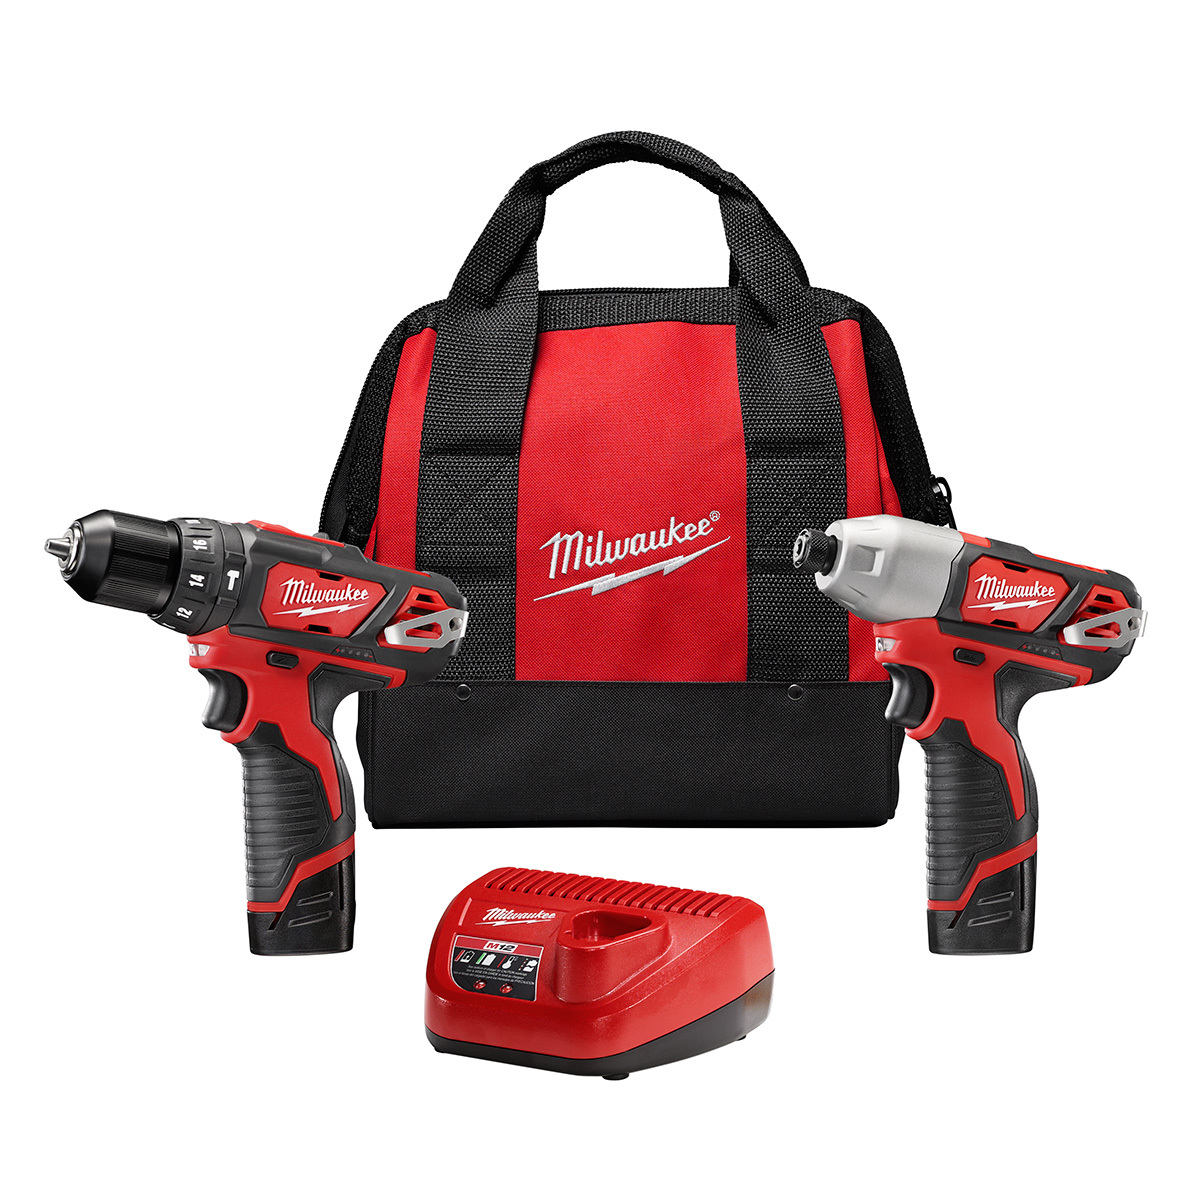 Milwaukee Drill Driver 1/2 7amp D Handle Power Tool 600 RPM Electric Corded for sale online 